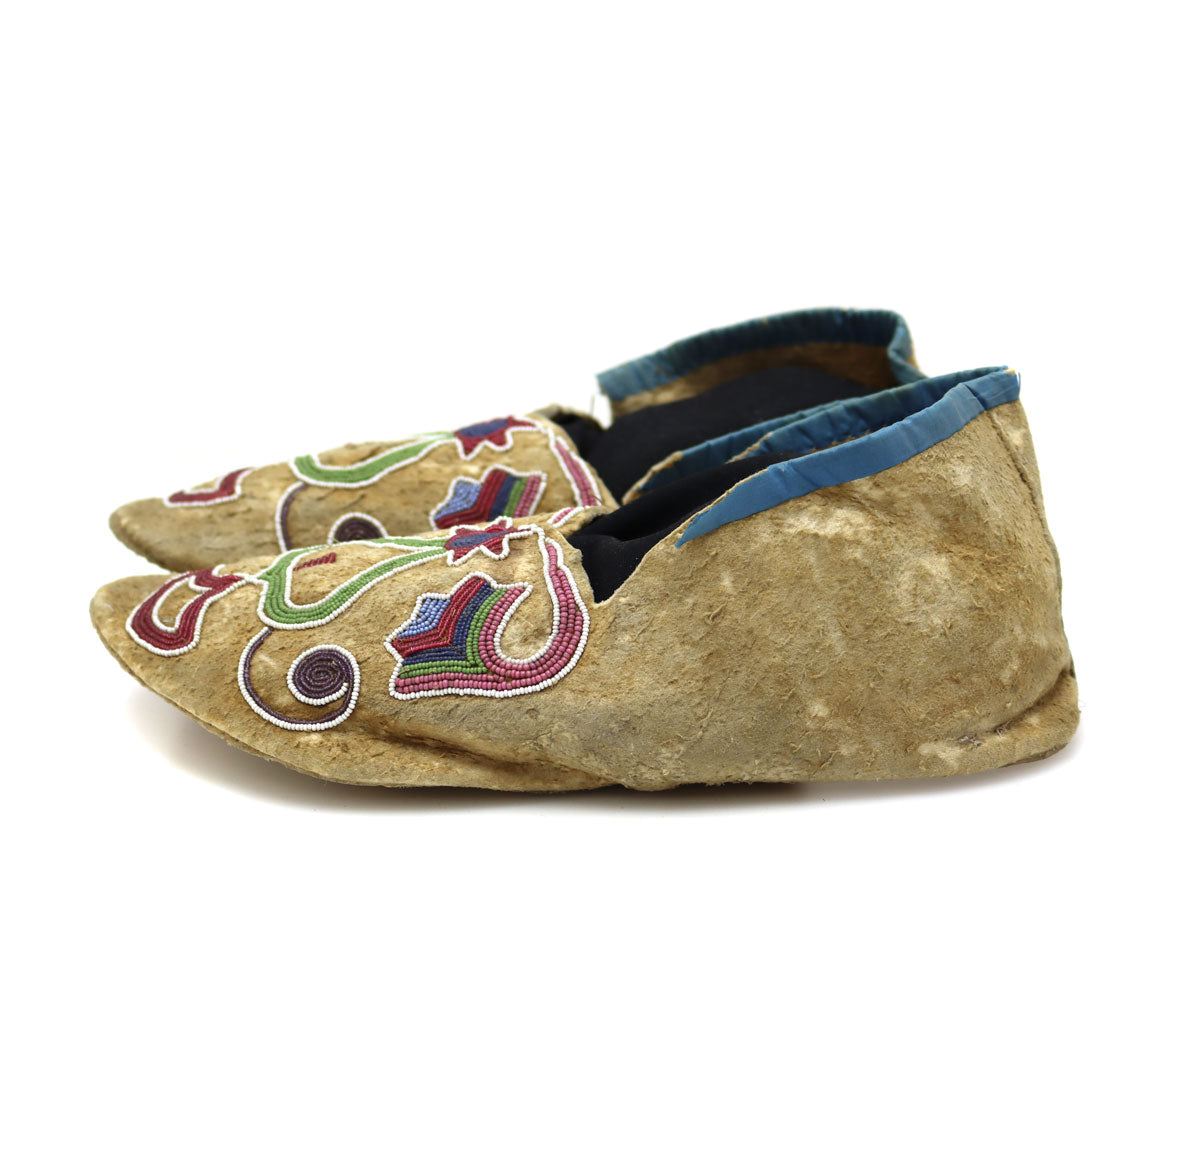 Woodlands (Sac and Fox) Leather Beaded Moccasins c. 1890-1900s, 3.5" x 9.5" x 3.5" (DW92323A-0421-006) 2
